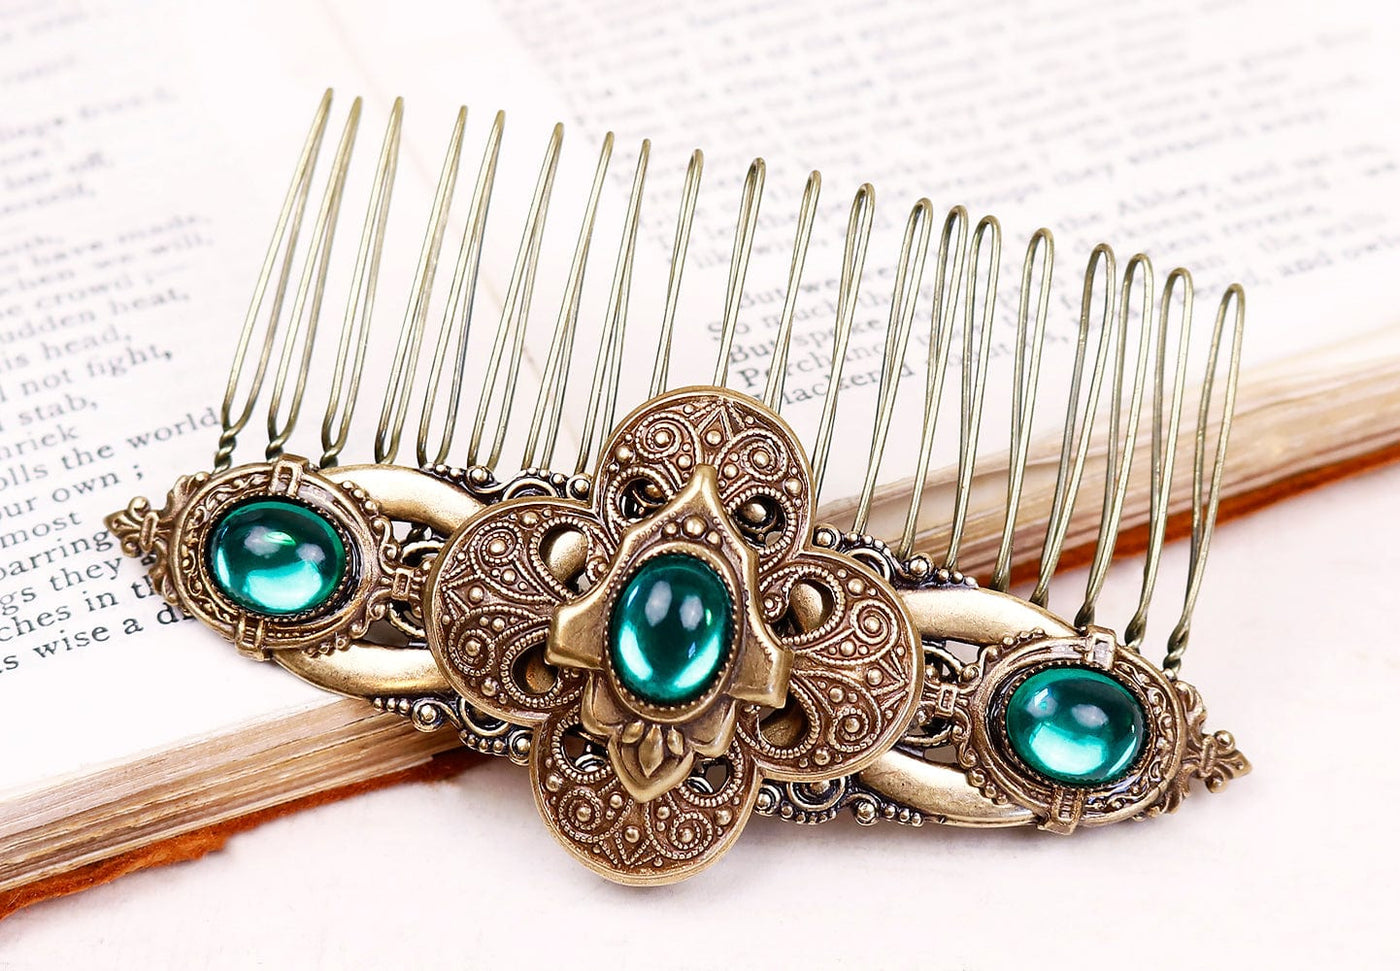 Avebury Comb in Emerald and Antiqued Brass by Rabbitwood and Reason